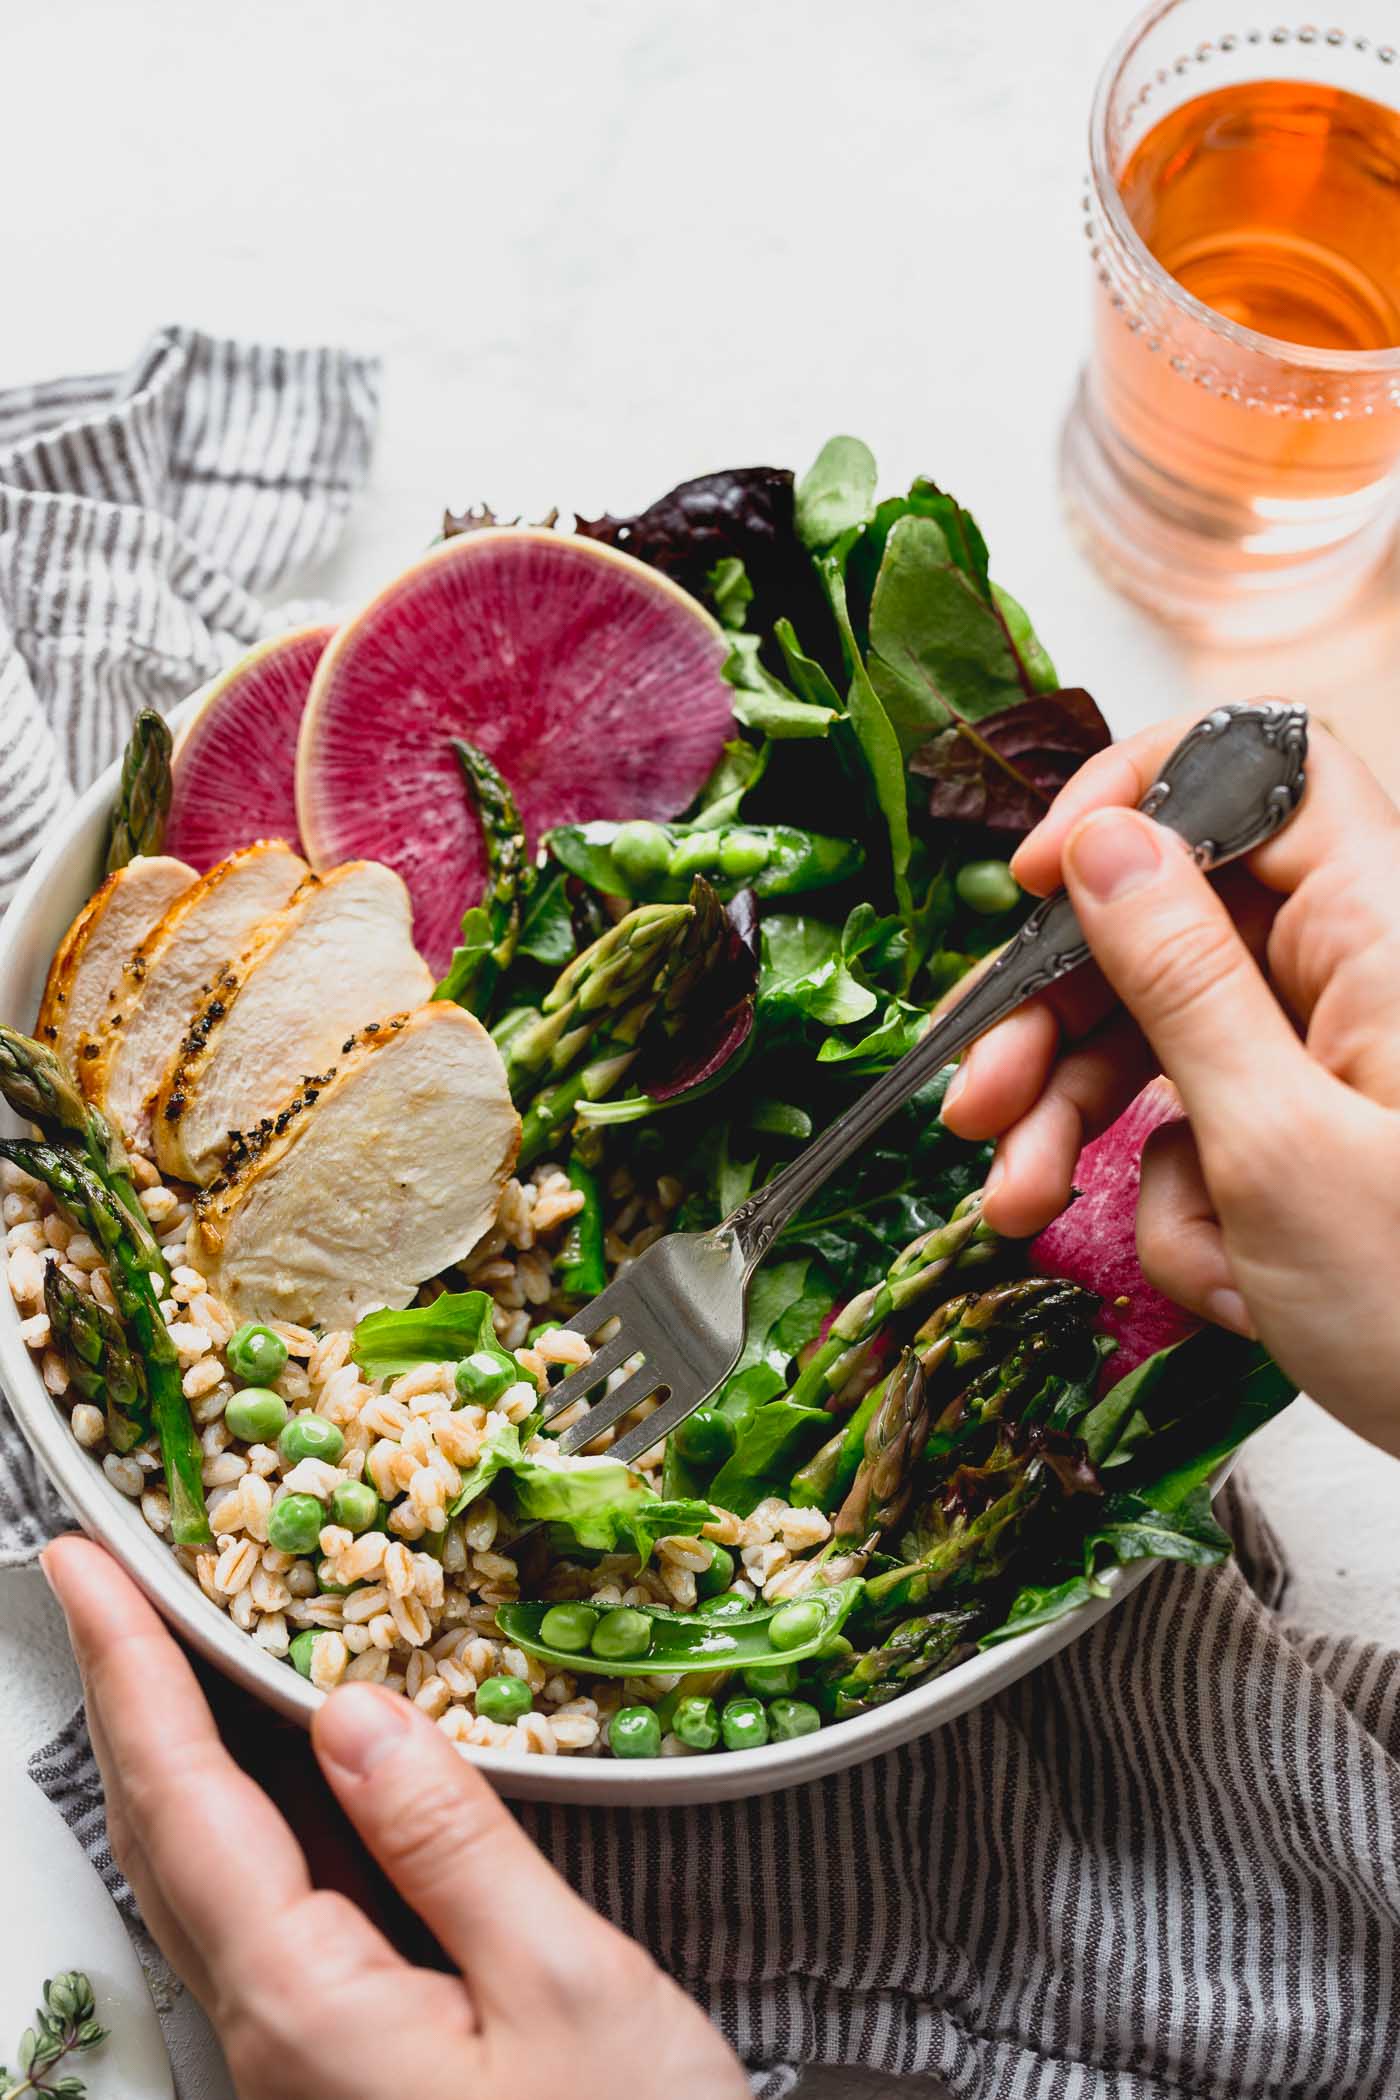 a healthy & seasonal springtime grain bowl with farro, asparagus, spring peas, greens, herbed chicken & a simple homemade lemon vinaigrette. this spring goddess grain bowl recipe is totally wholesome, meal prep friendly, & comes together in 30 minutes or less. the perfect easy weeknight dinner for this spring! #grainbowl #healthygrainbowl #saladrecipe #mealpreprecipe #springrecipe #asparagus #springpeas